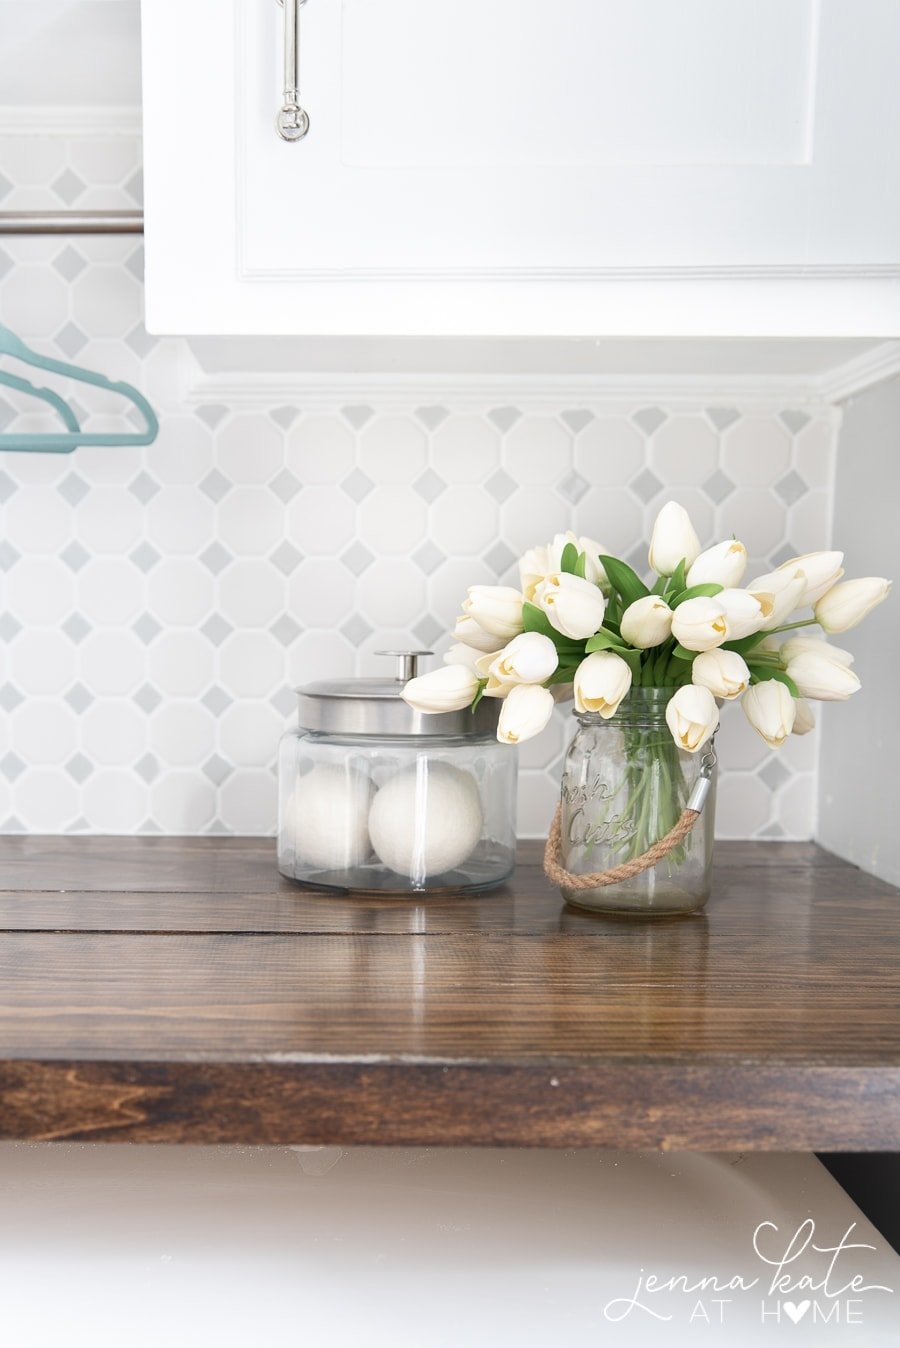 Bouquet of white flowers and glass jar rest on wooden countertop in laundry room